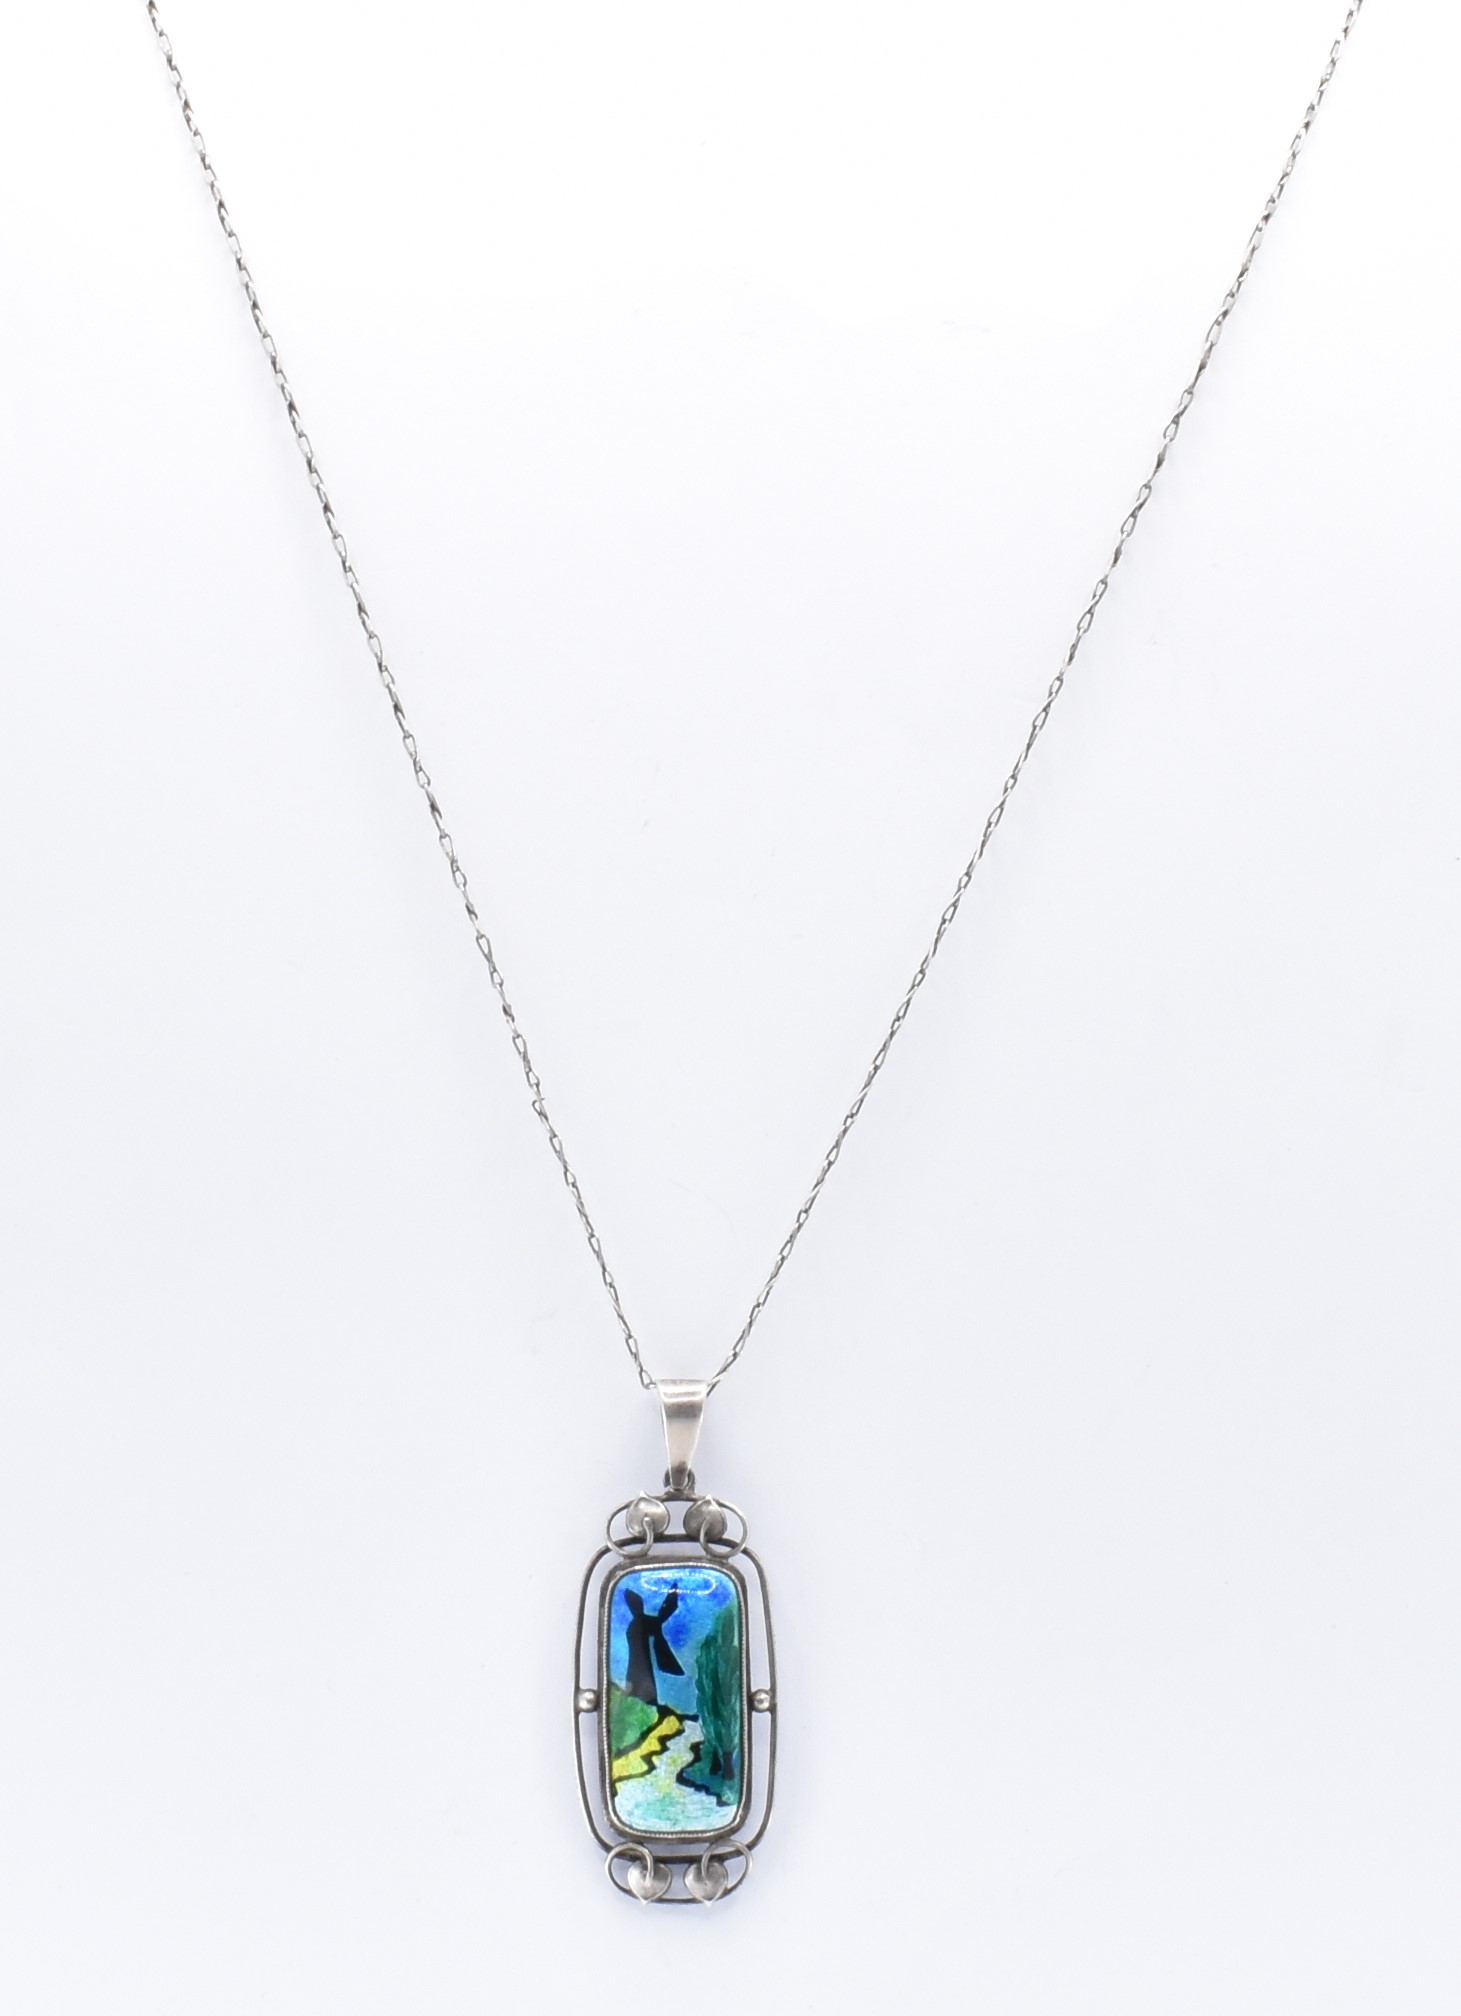 ARTS & CRAFTS SILVER ENAMELLED PENDANT NECKLACE - Image 2 of 5